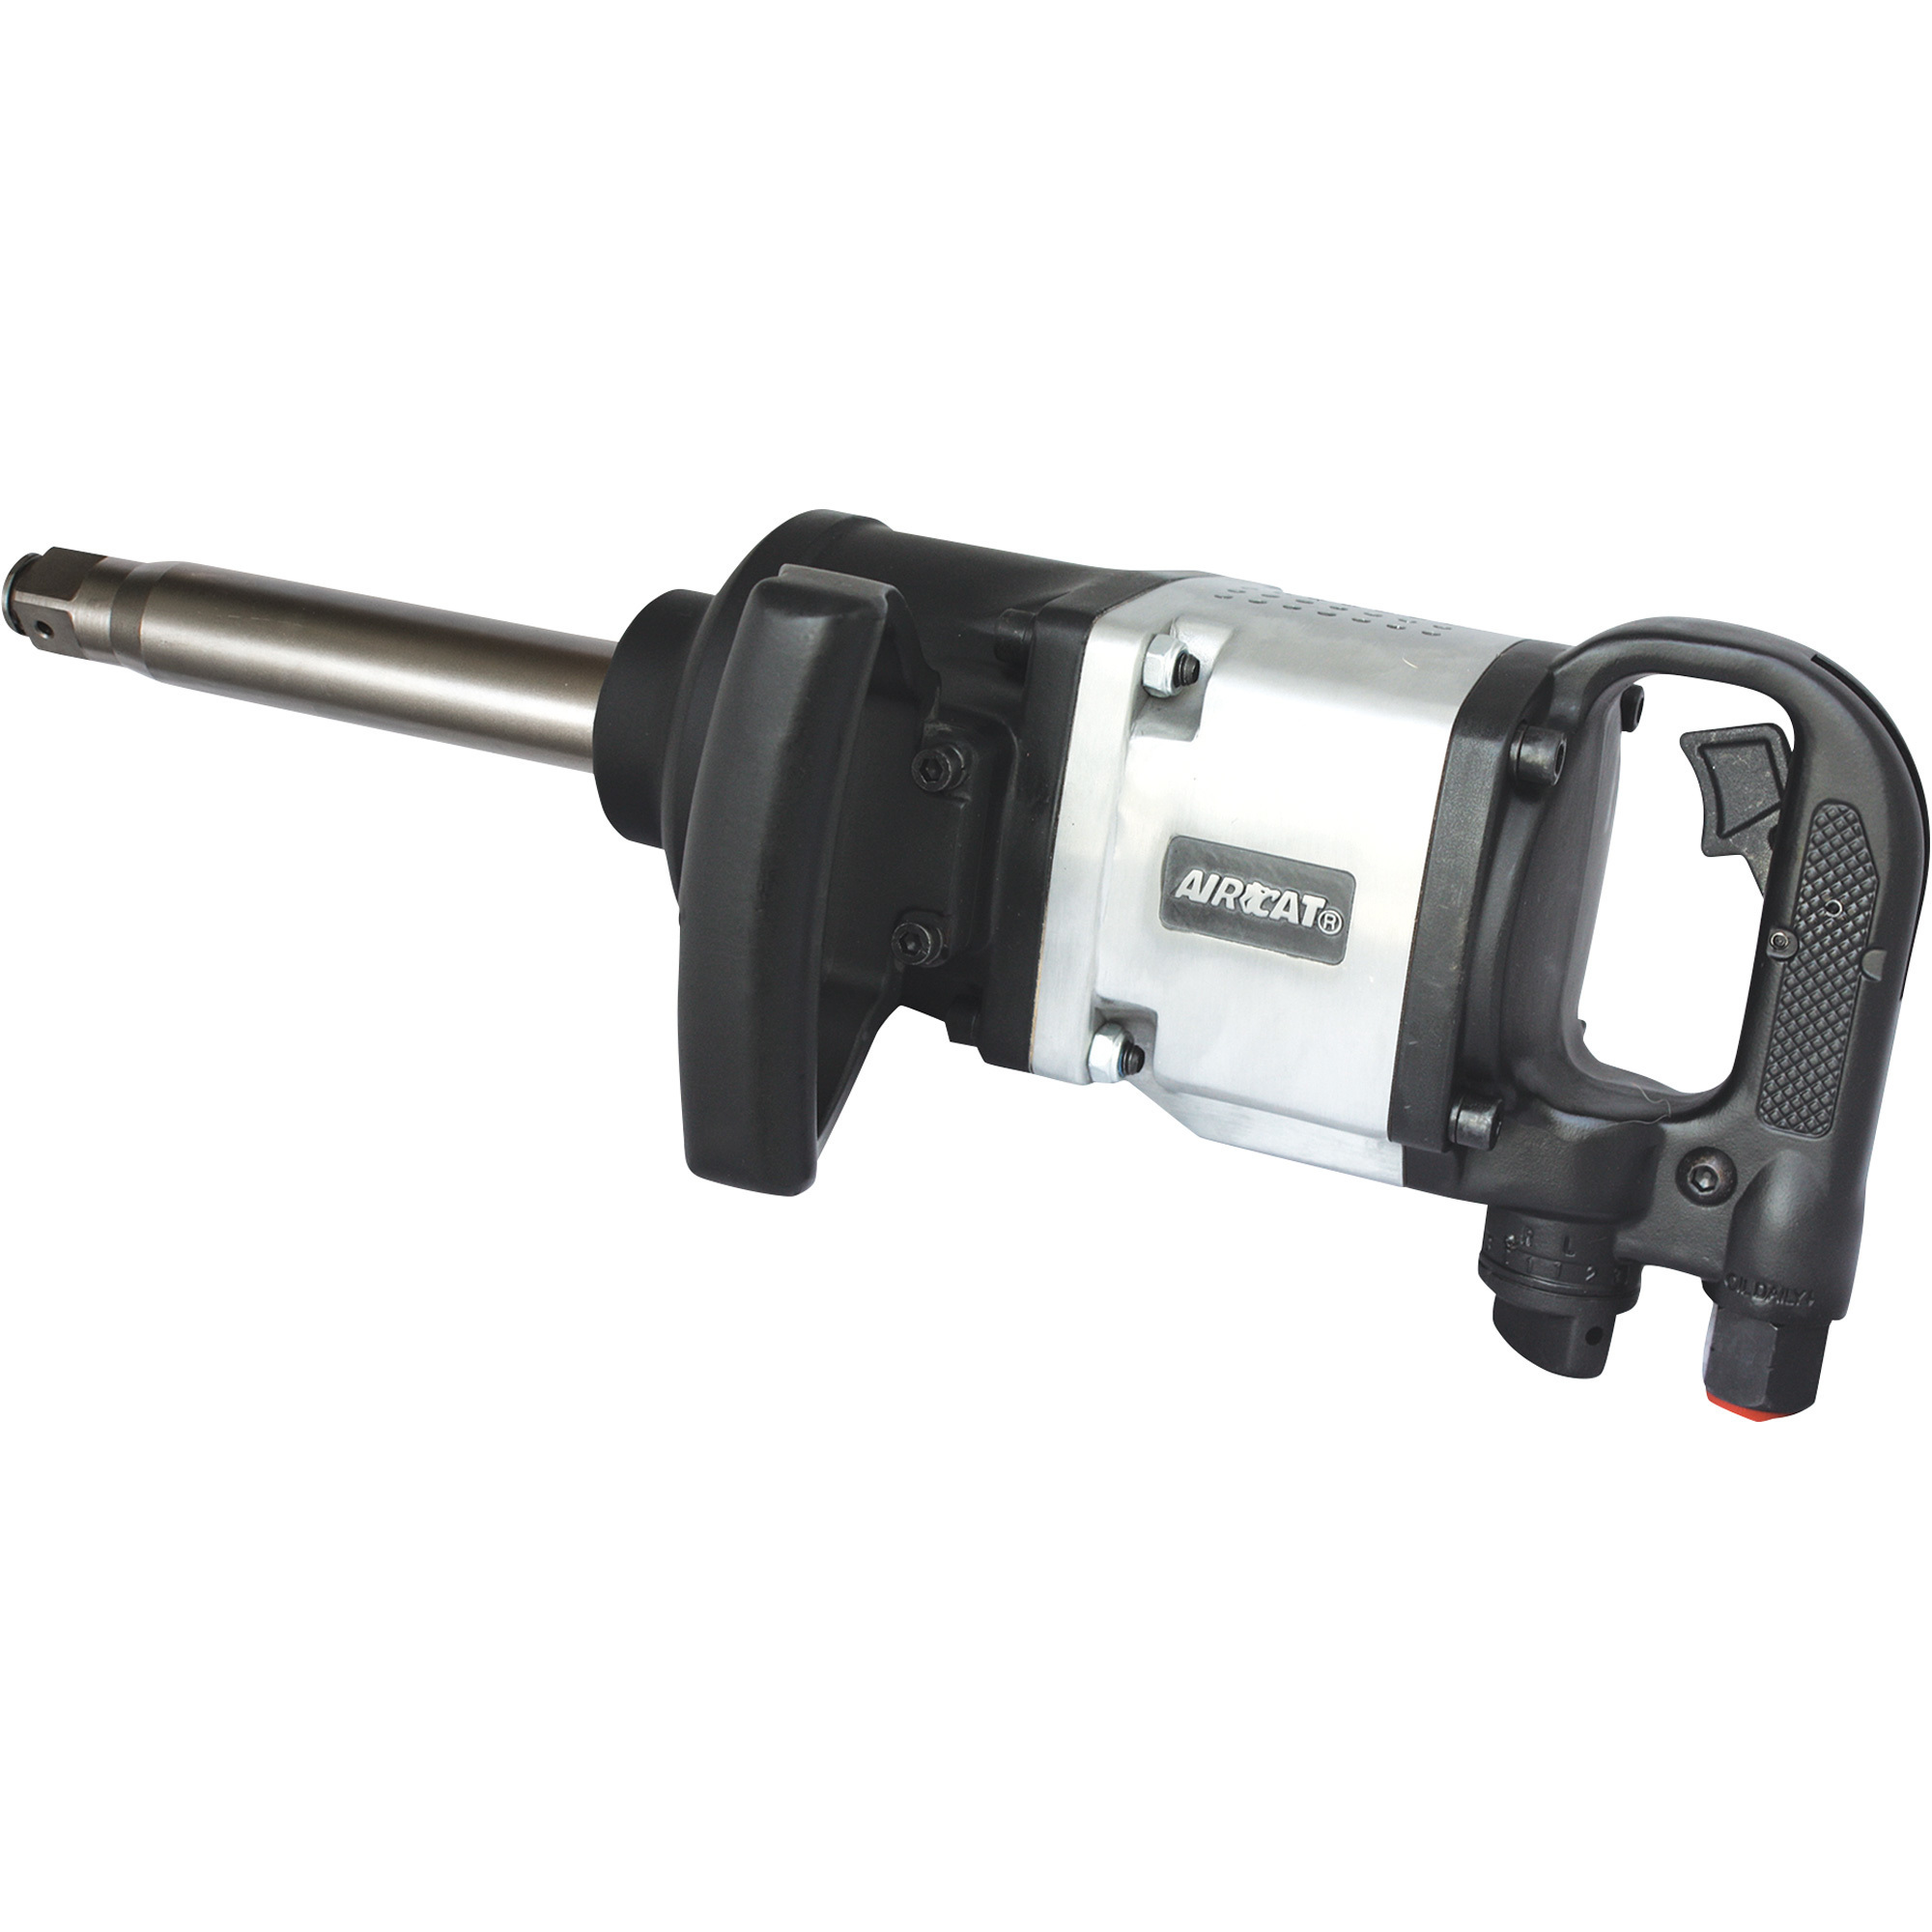 AIRCAT Air Impact Wrench, 1Inch Drive, 8Inch Extended Anvil, 2100ft./lbs. Max. Torque, Model #1992